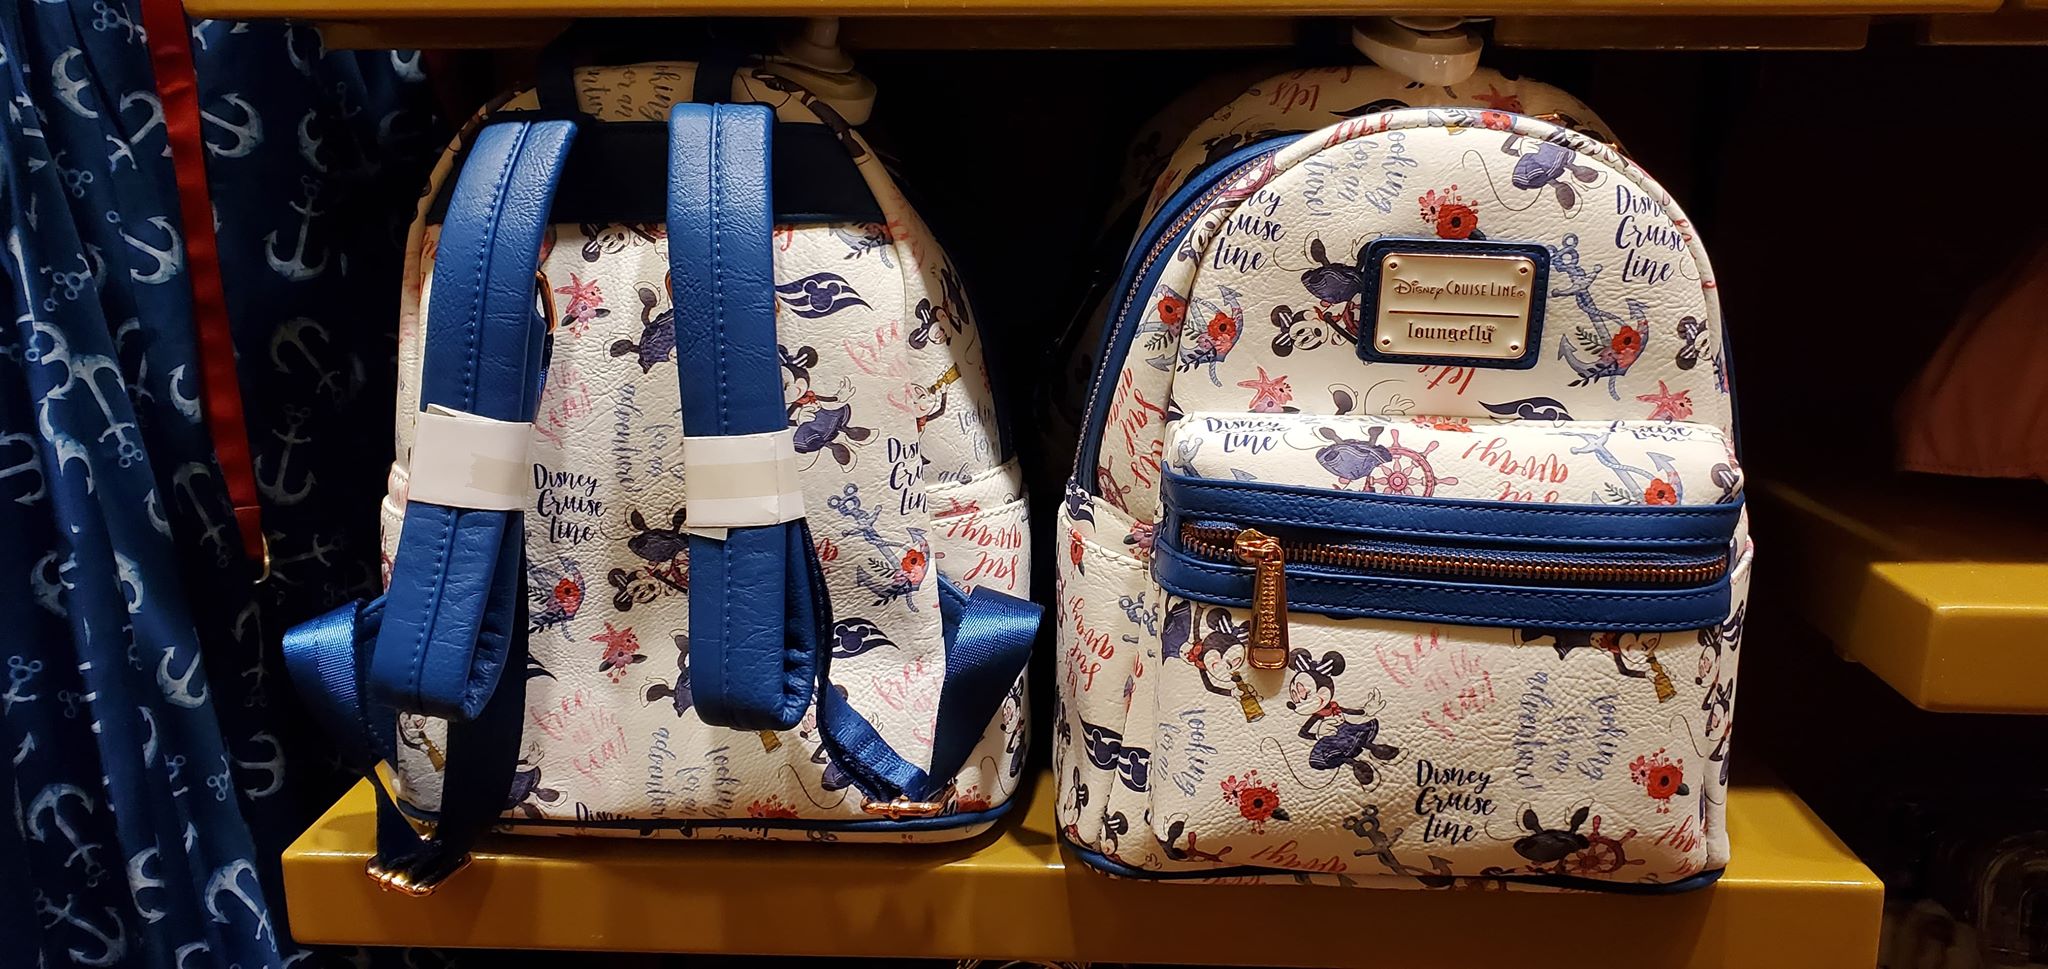 Seas Every Day With The New Floral DCL Merchandise Collection